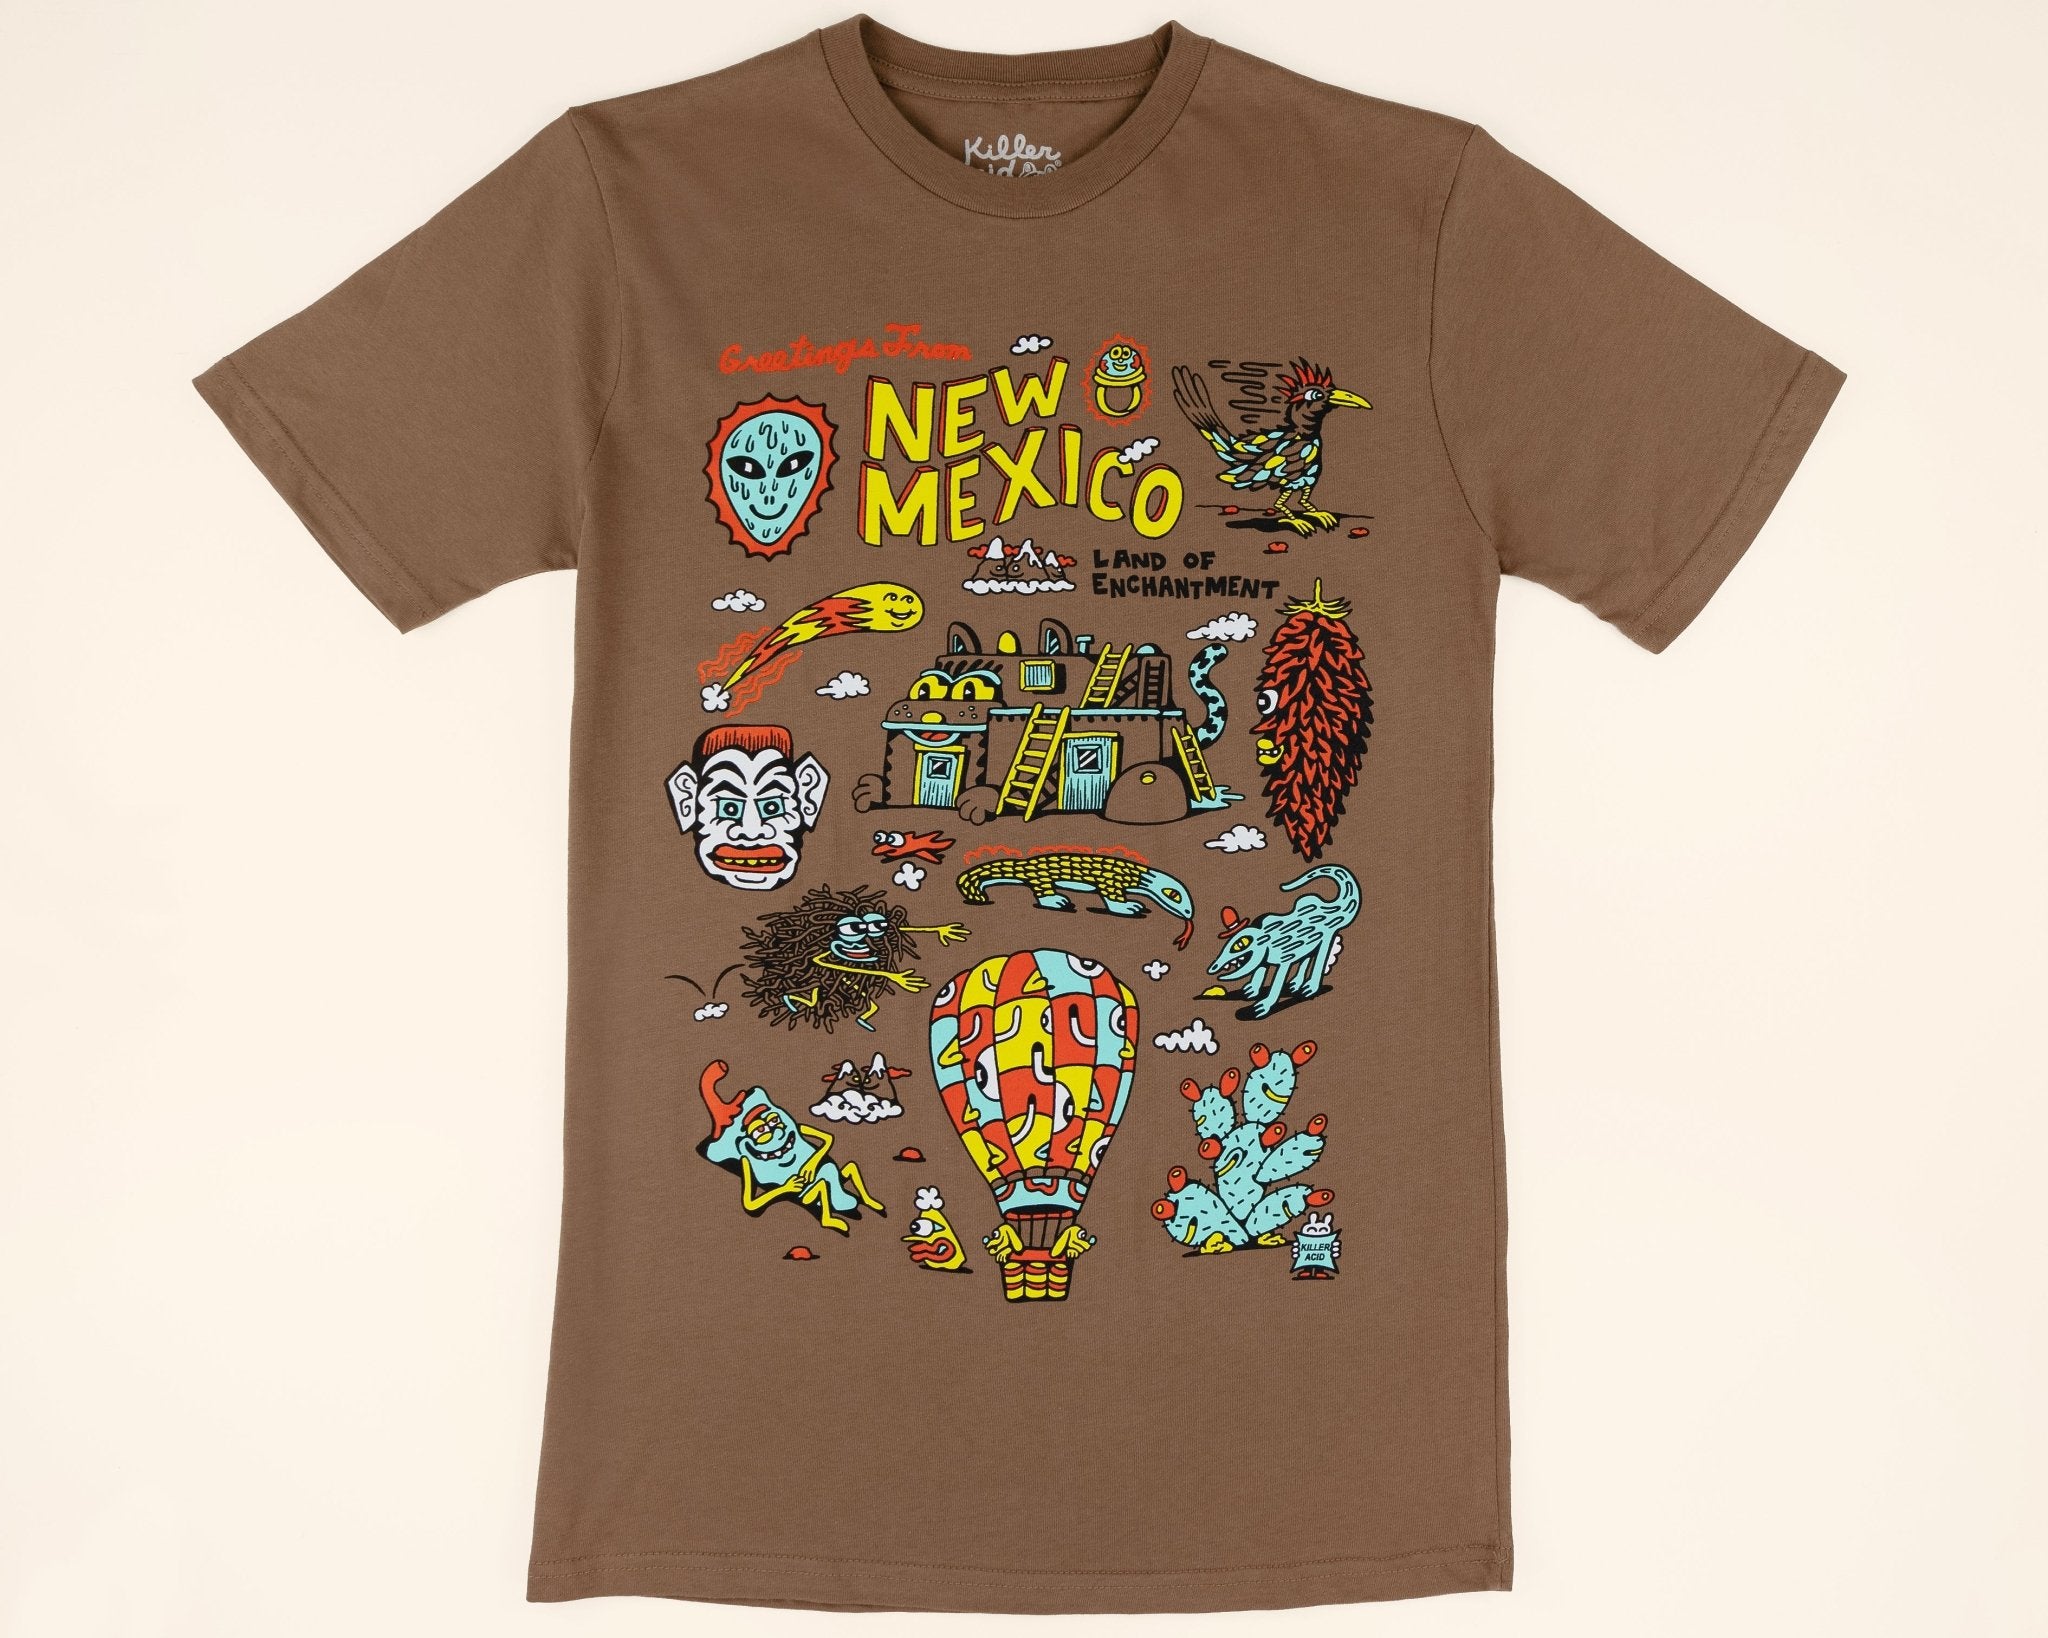 Greetings from New Mexico T-Shirt – Killer Acid